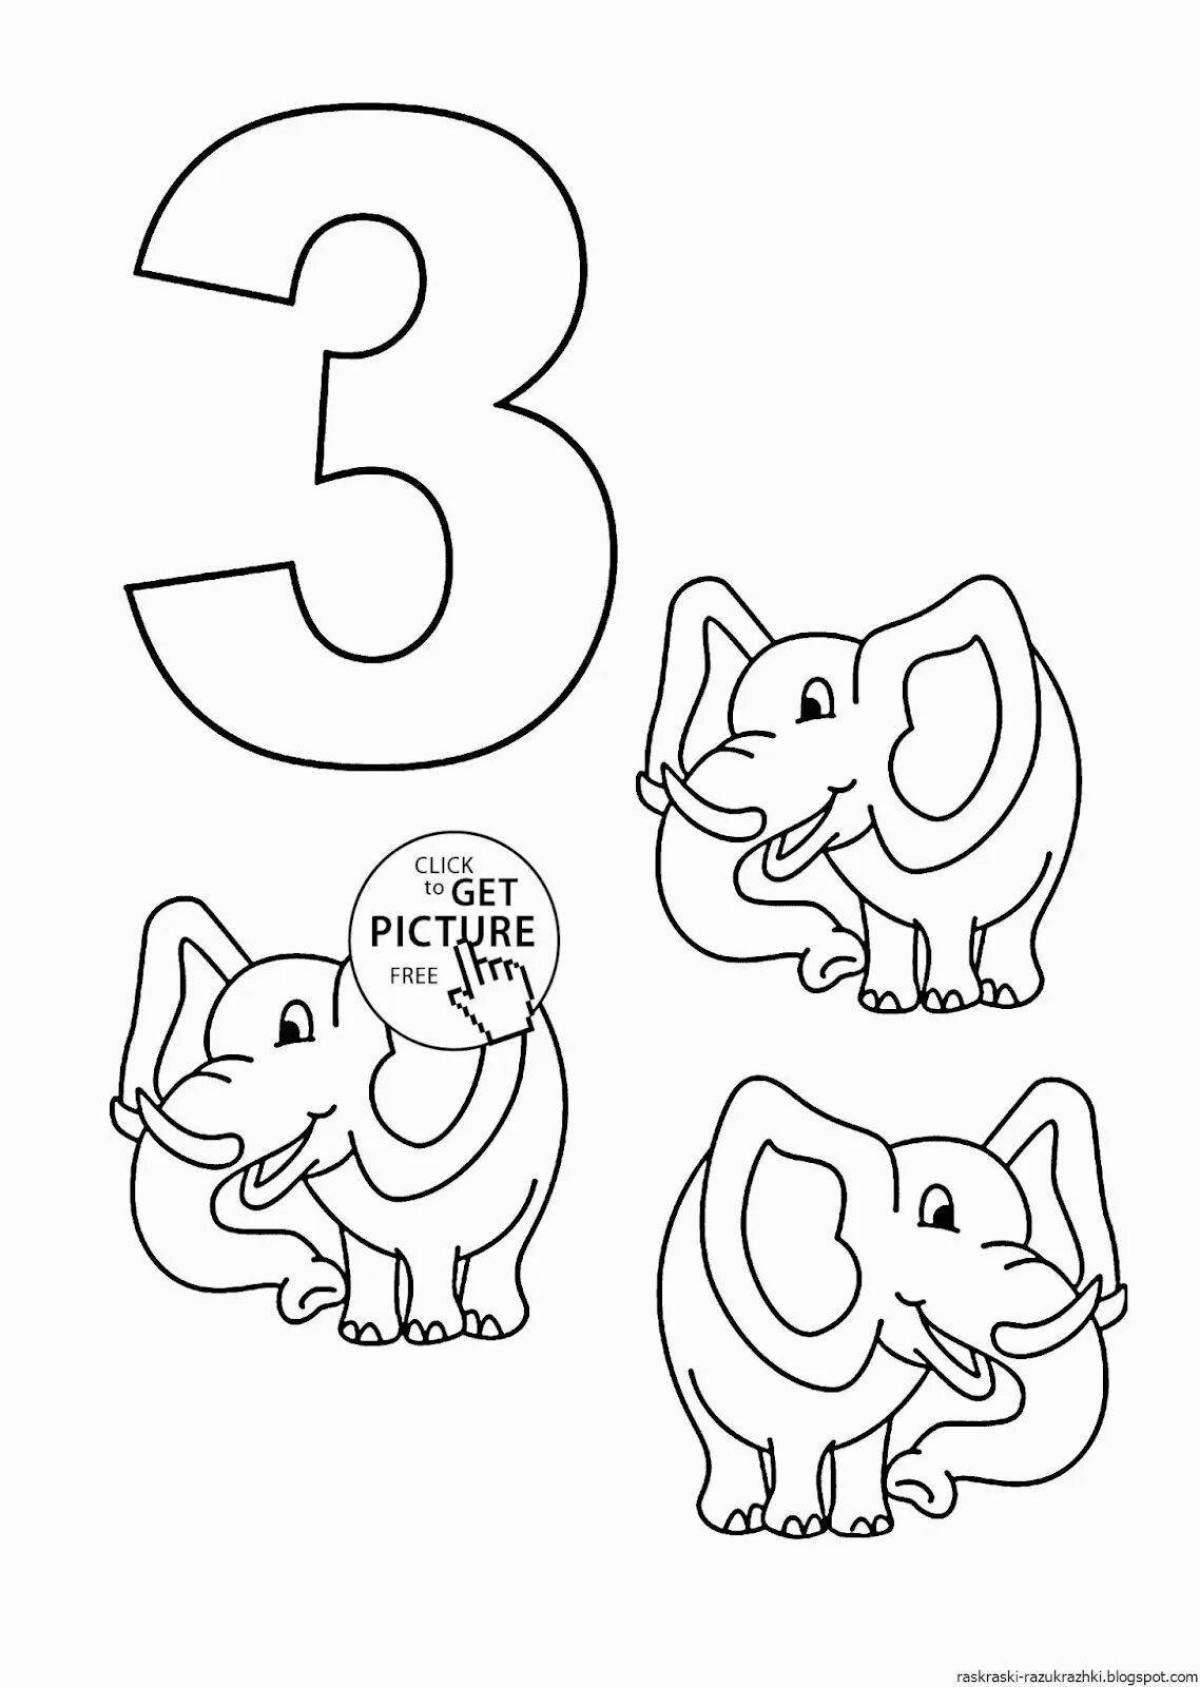 Color number 3 coloring for preschoolers